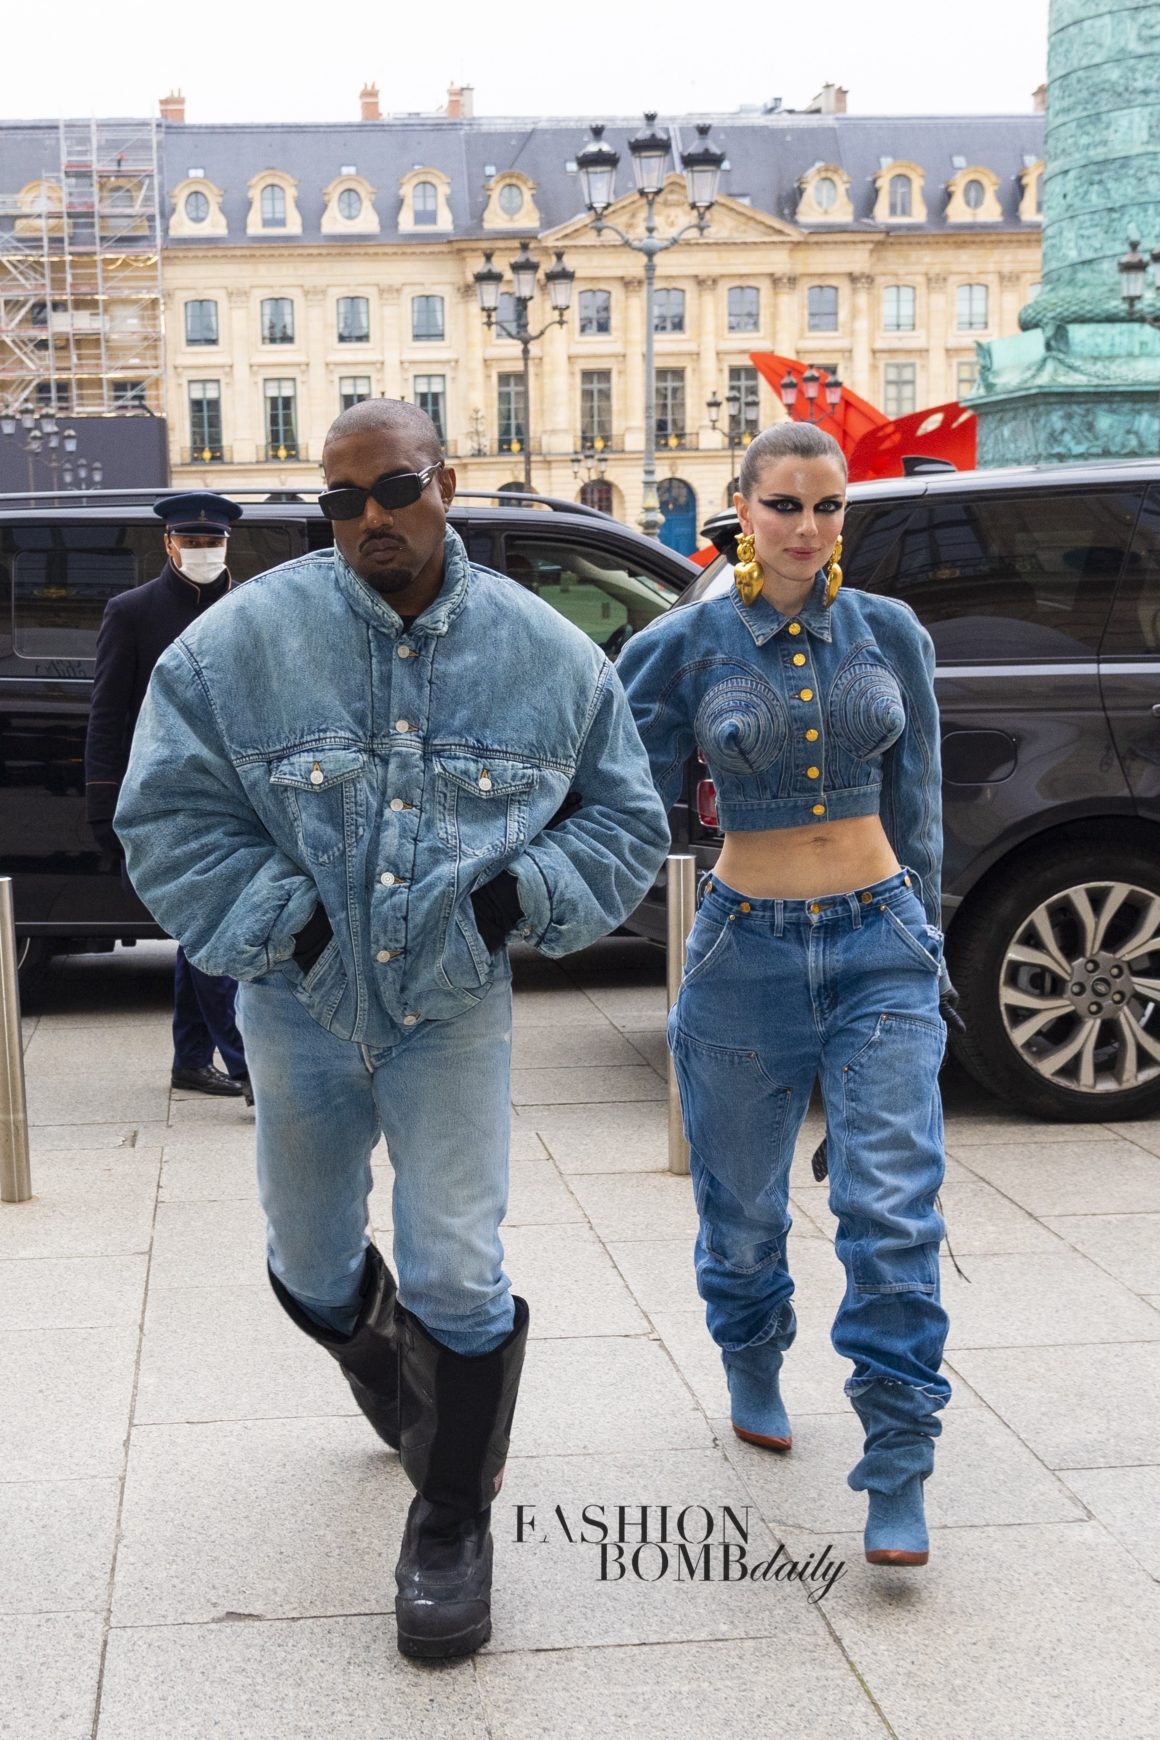 Kanye West and Girlfriend Julia Fox attend Kenzo Spring 2022 Show, With Kanye in All Denim